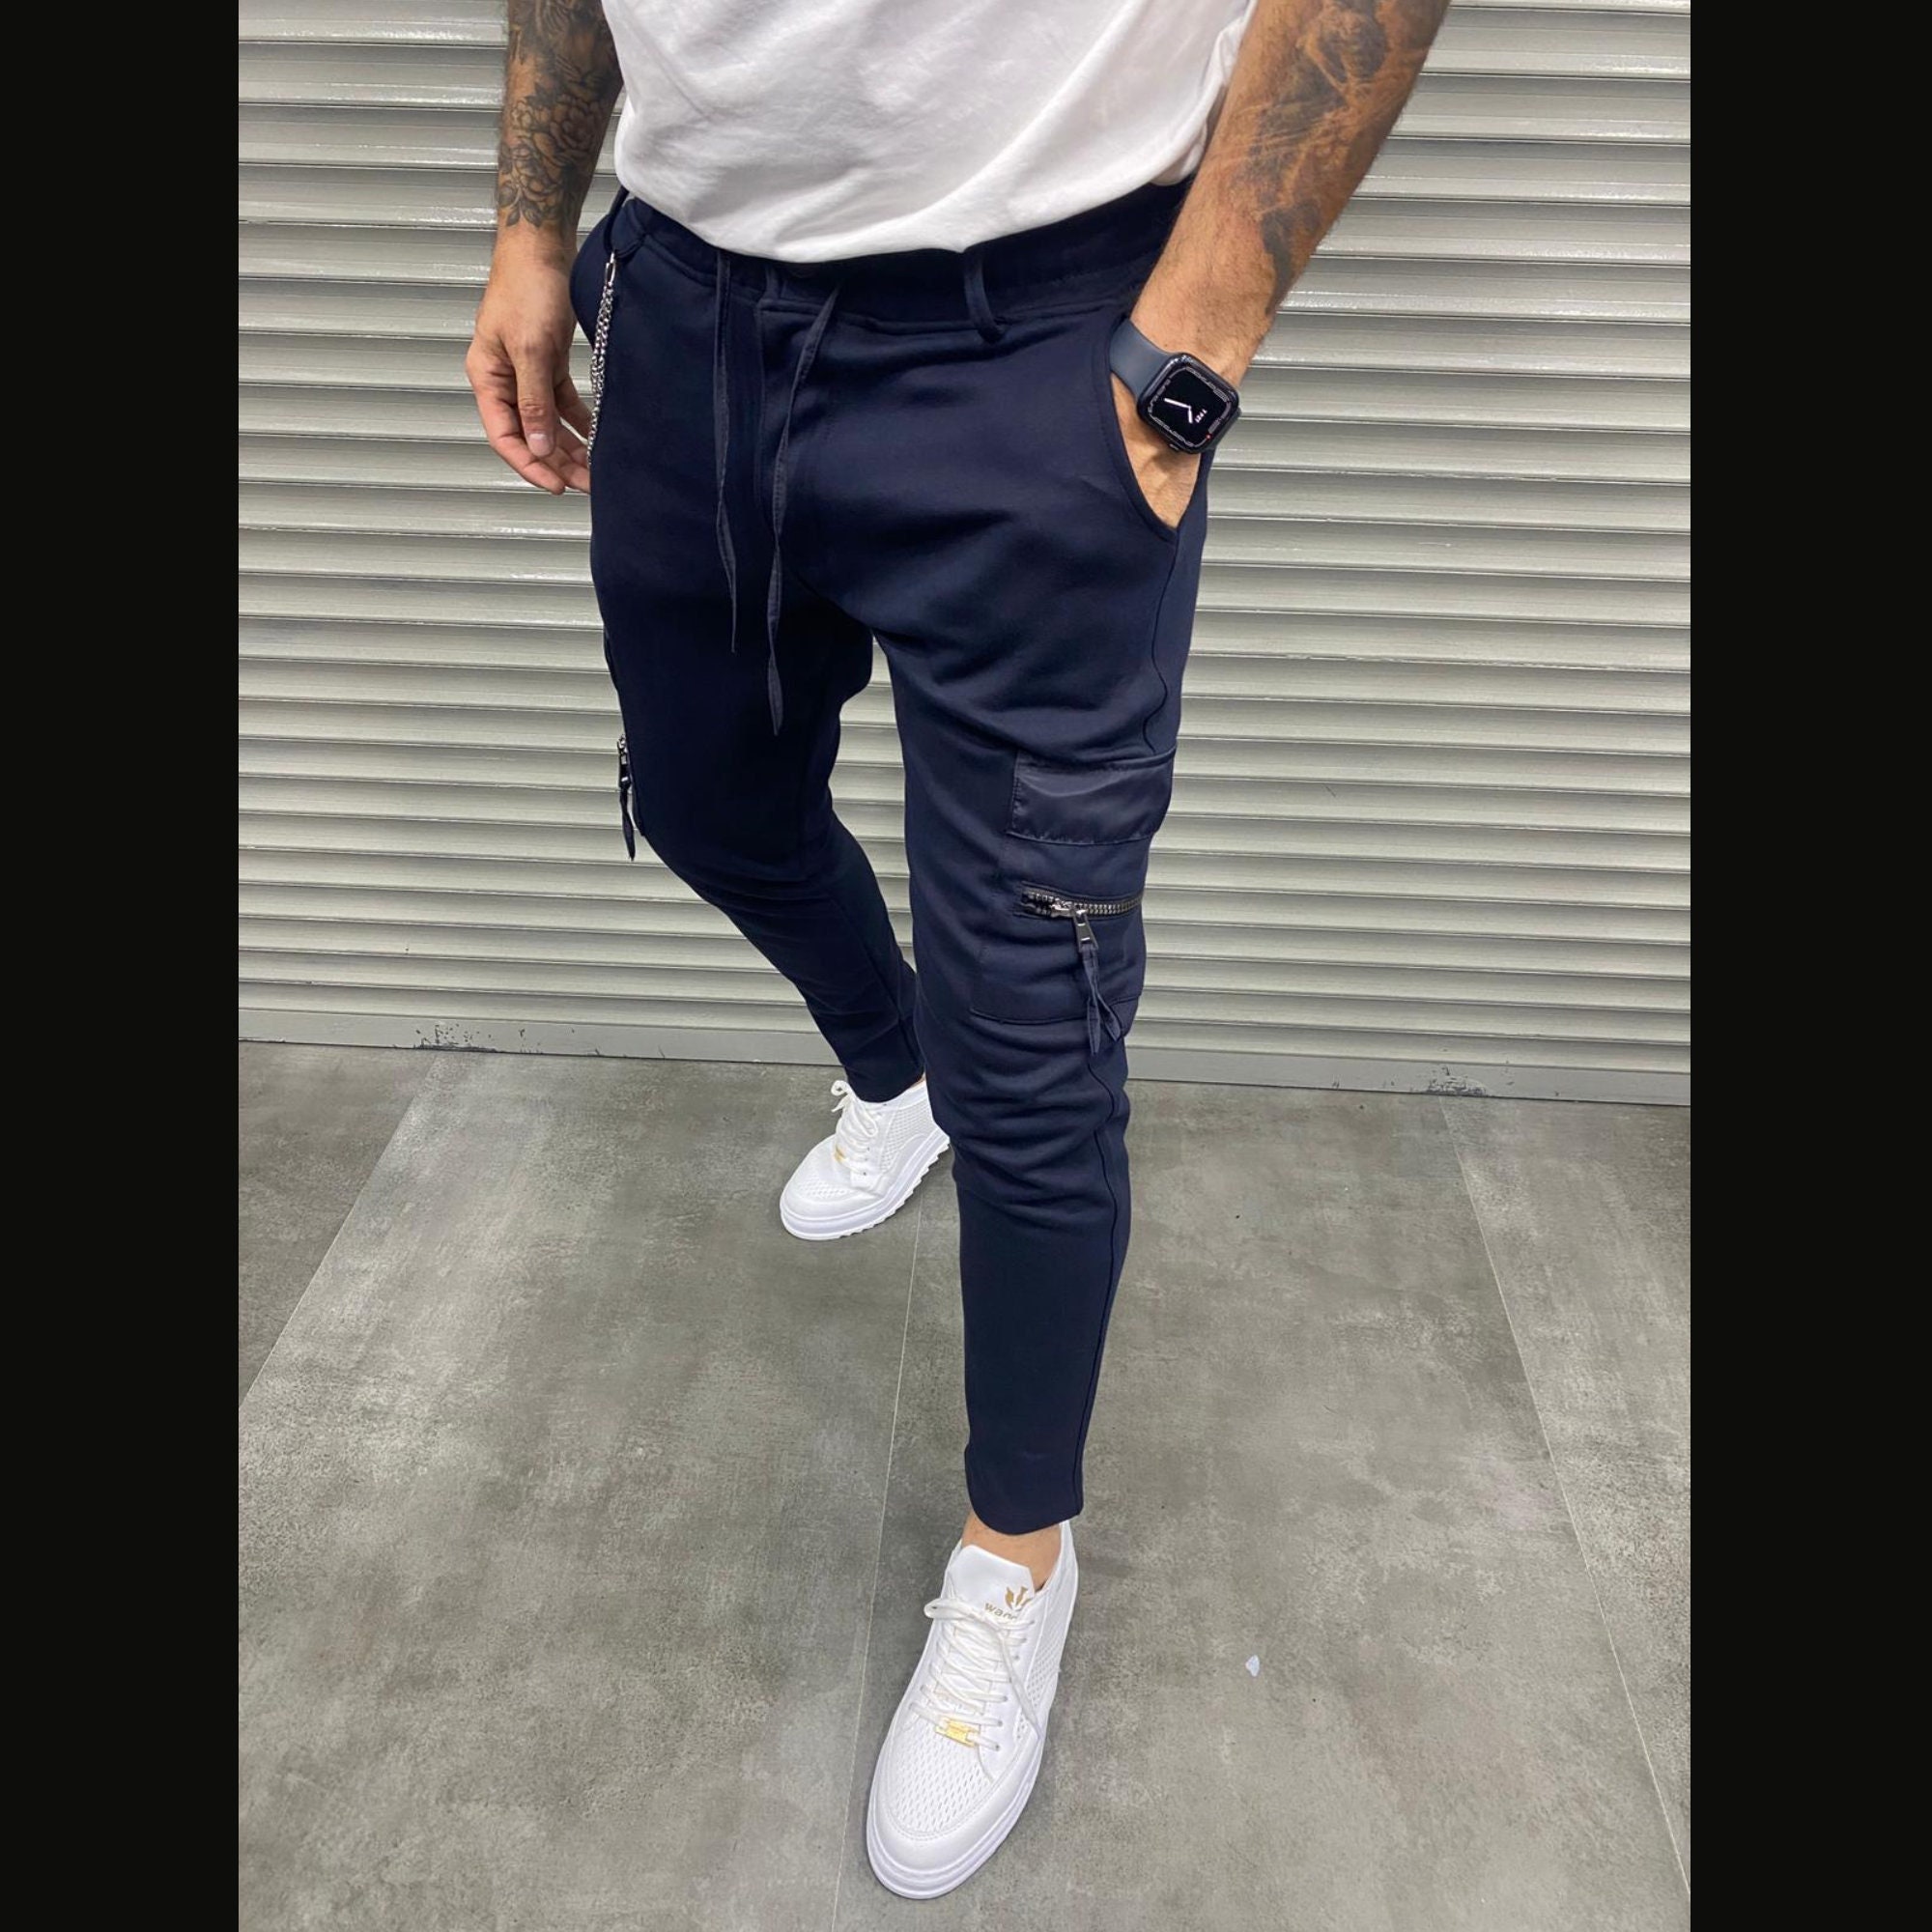 Jogger Pants  Material COTTON Material Polyester Decoration Pockets  Thickness Midweight Fabric  Mens pants casual Mens sweatpants Mens joggers  sweatpants